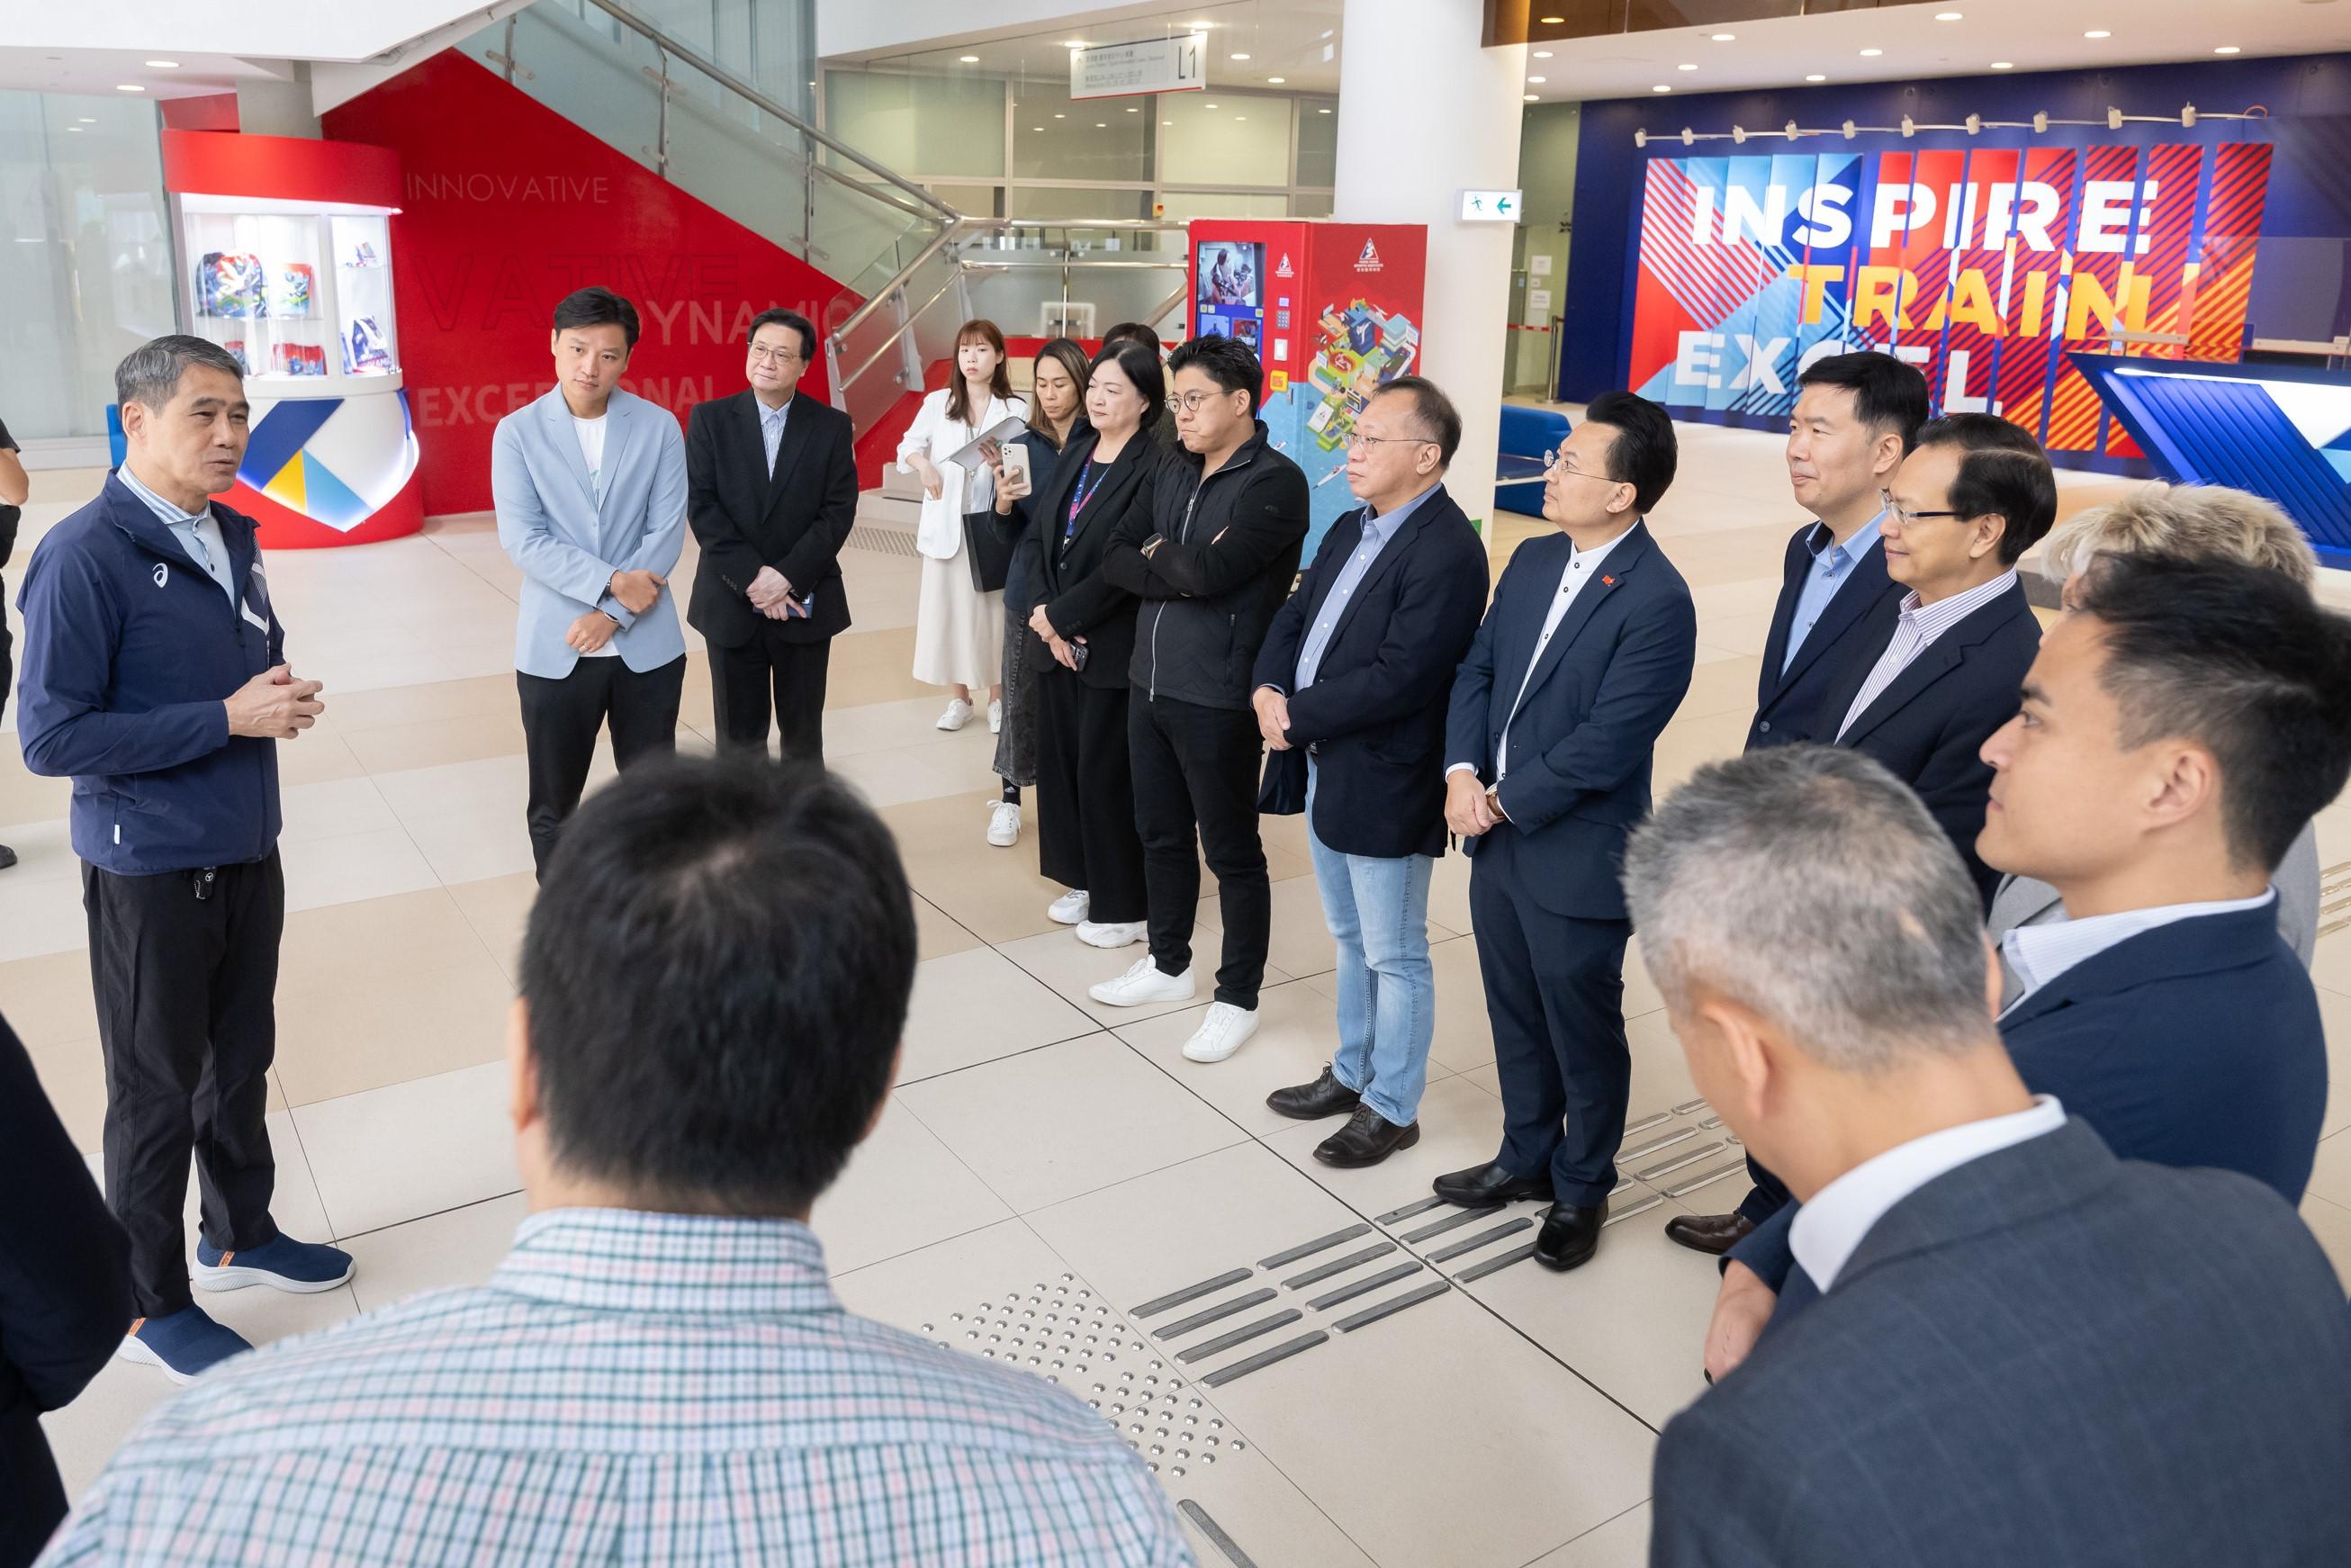 The Legislative Council (LegCo) Panel on Home Affairs, Culture and Sports visited the Hong Kong Sports Institute (HKSI) today (November 14). Photo shows LegCo Members receiving a briefing by the Chairman of the HKSI, Mr Tang King-shing (first left), on the construction progress of the new facilities building.